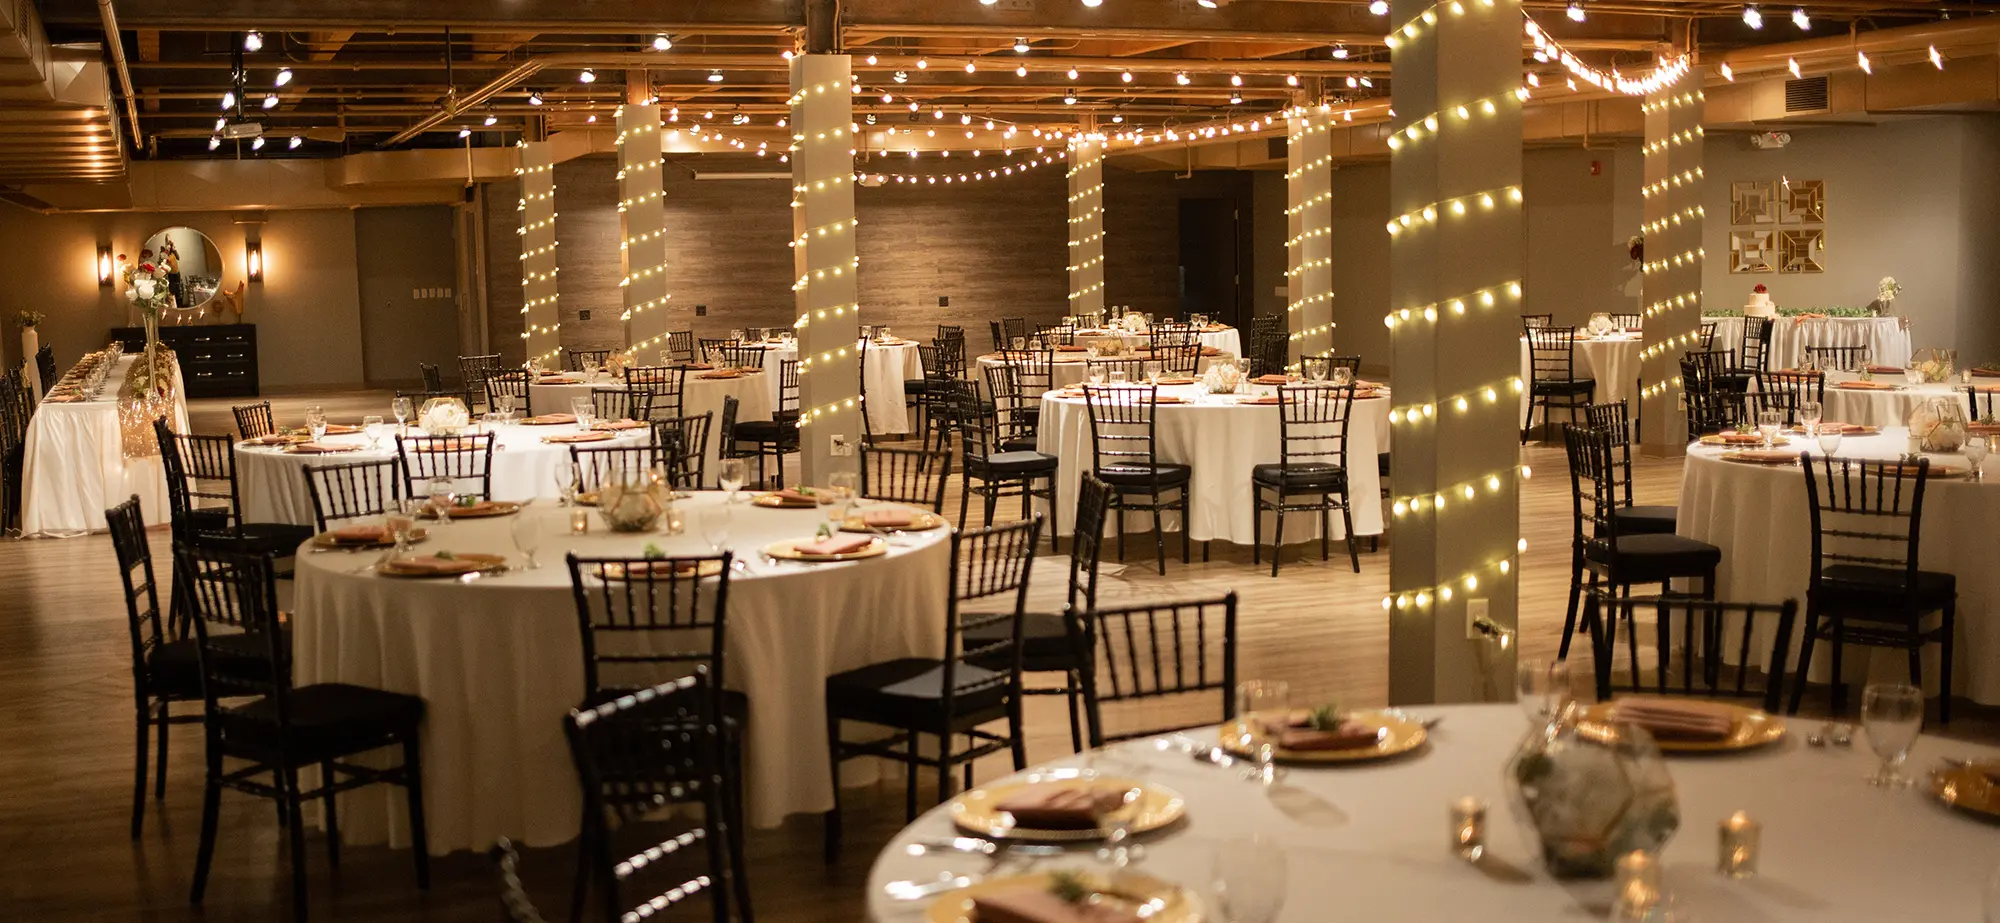 Large room area with white tables and black chairs inside The Waddell Center venue with numerous light decorations all around